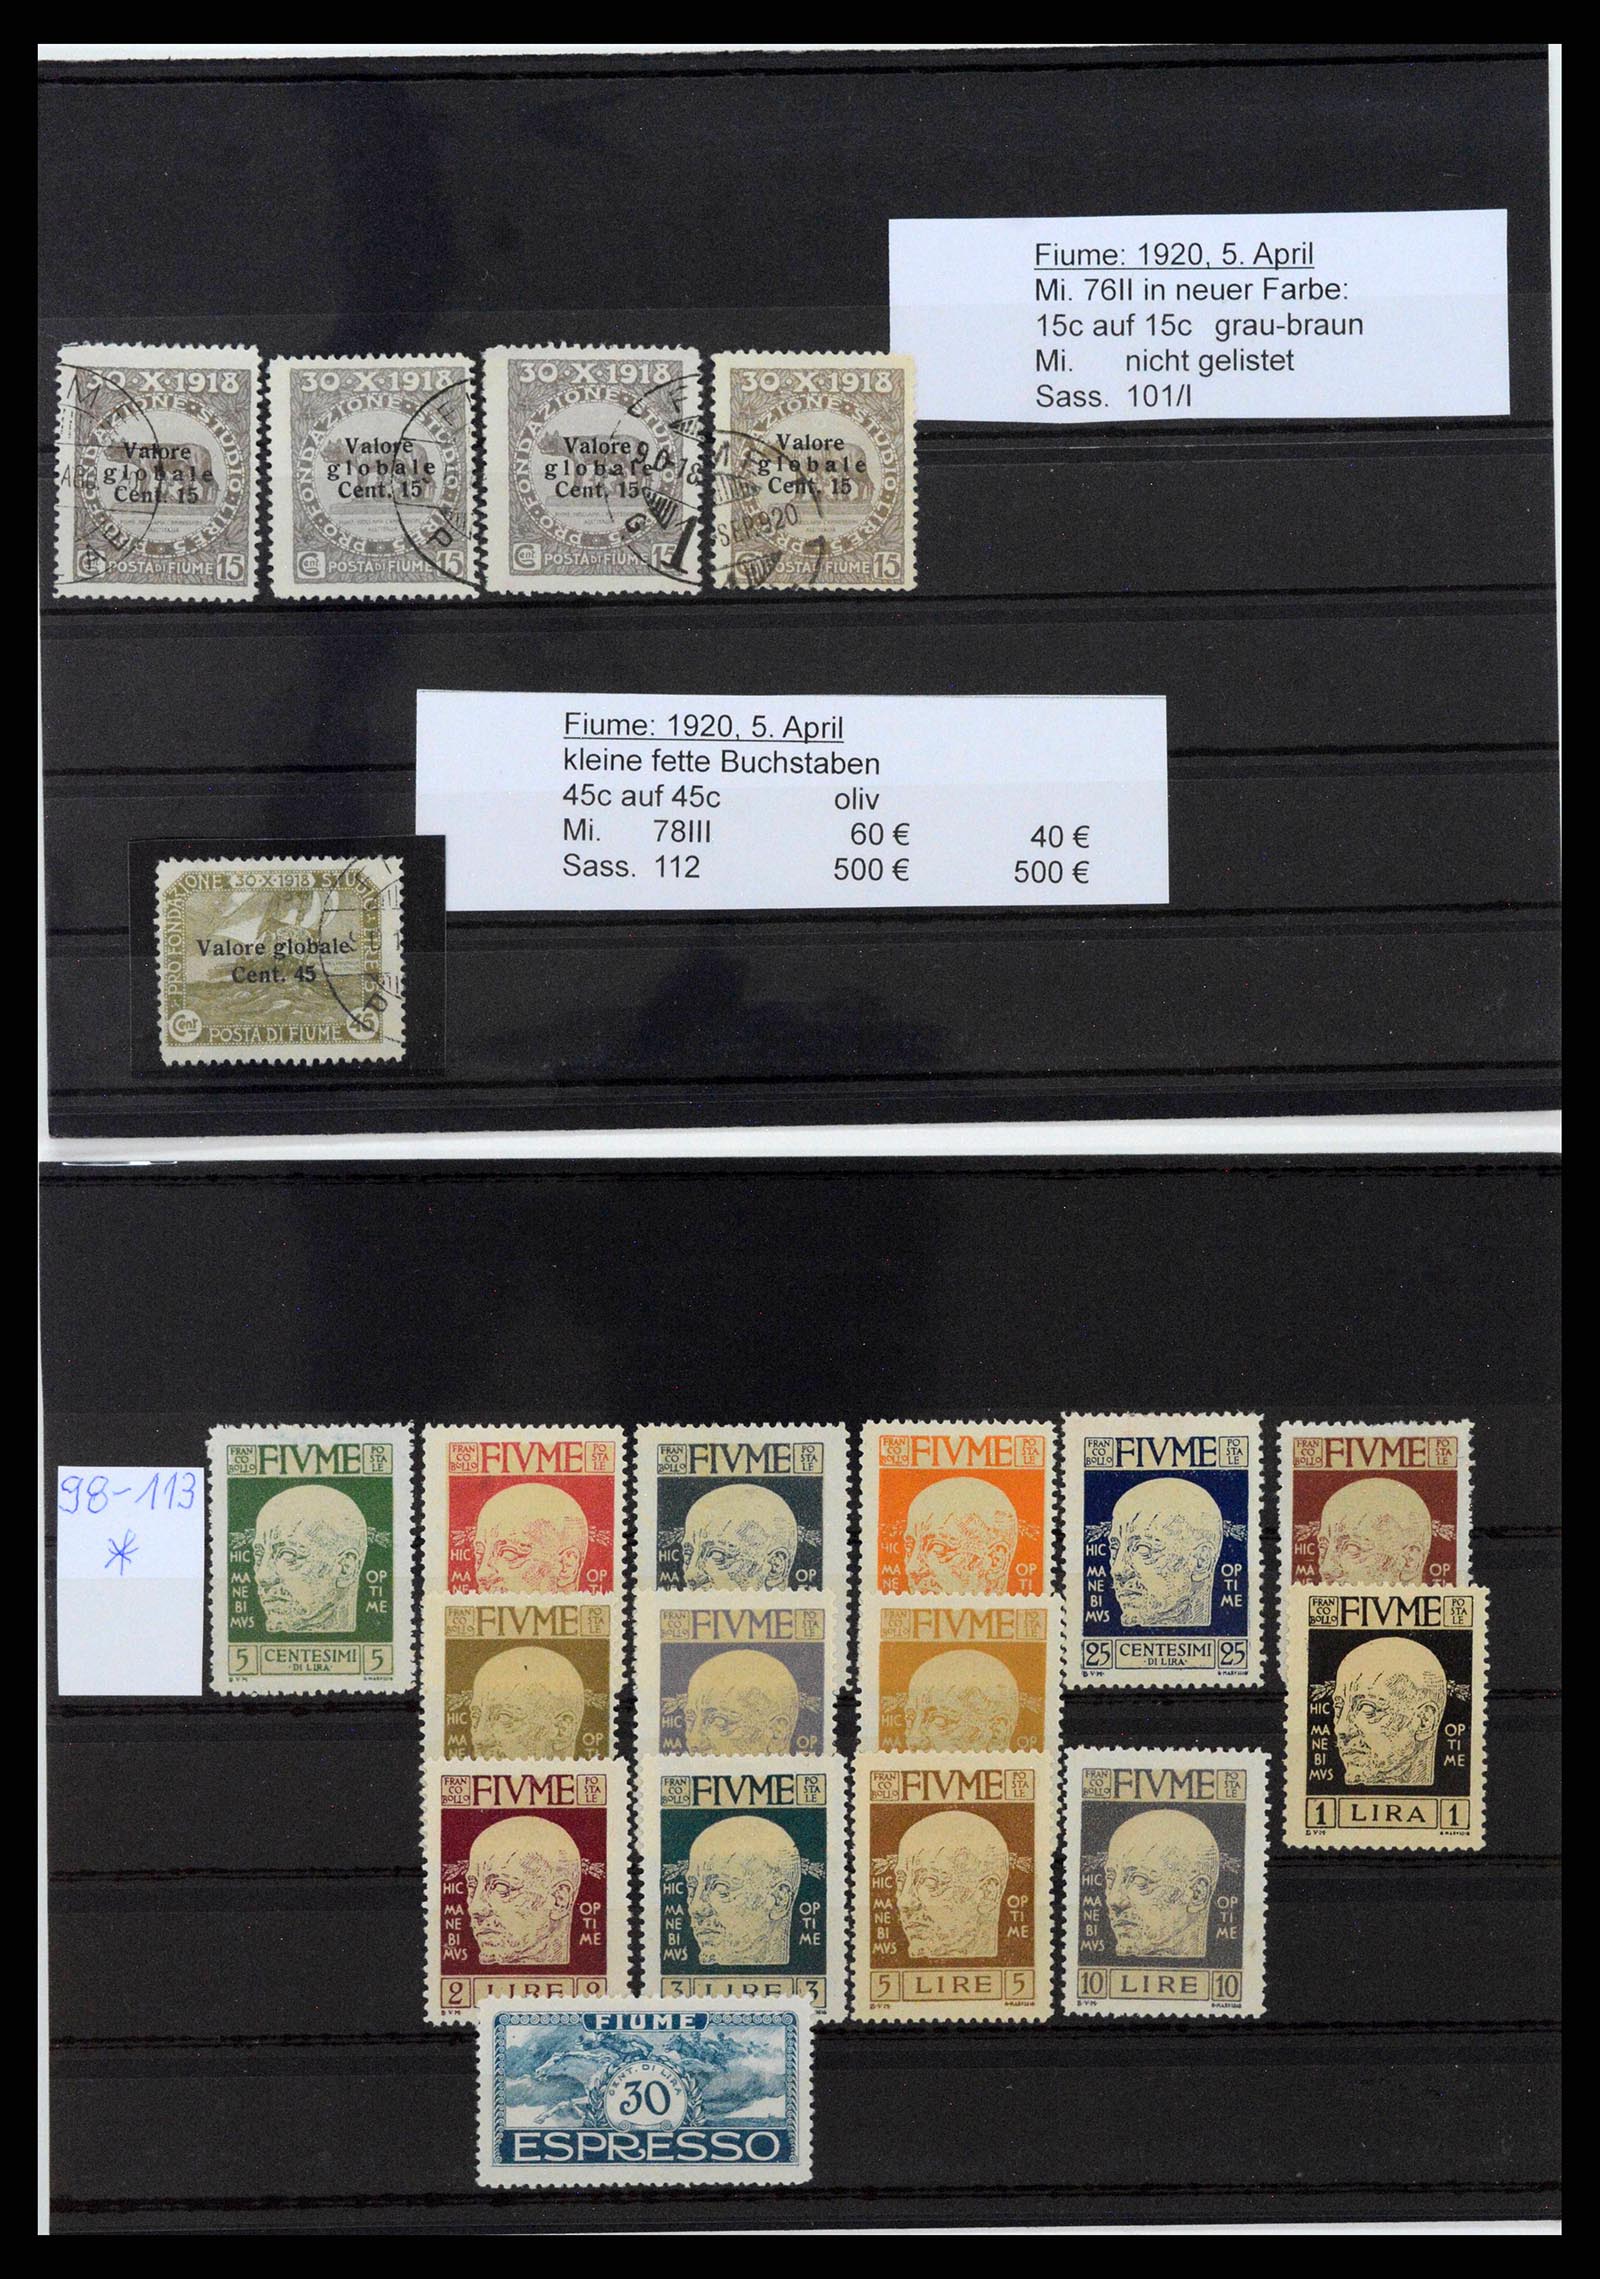 38507 0051 - Stamp collection 38507 Fiume 1920-1924.